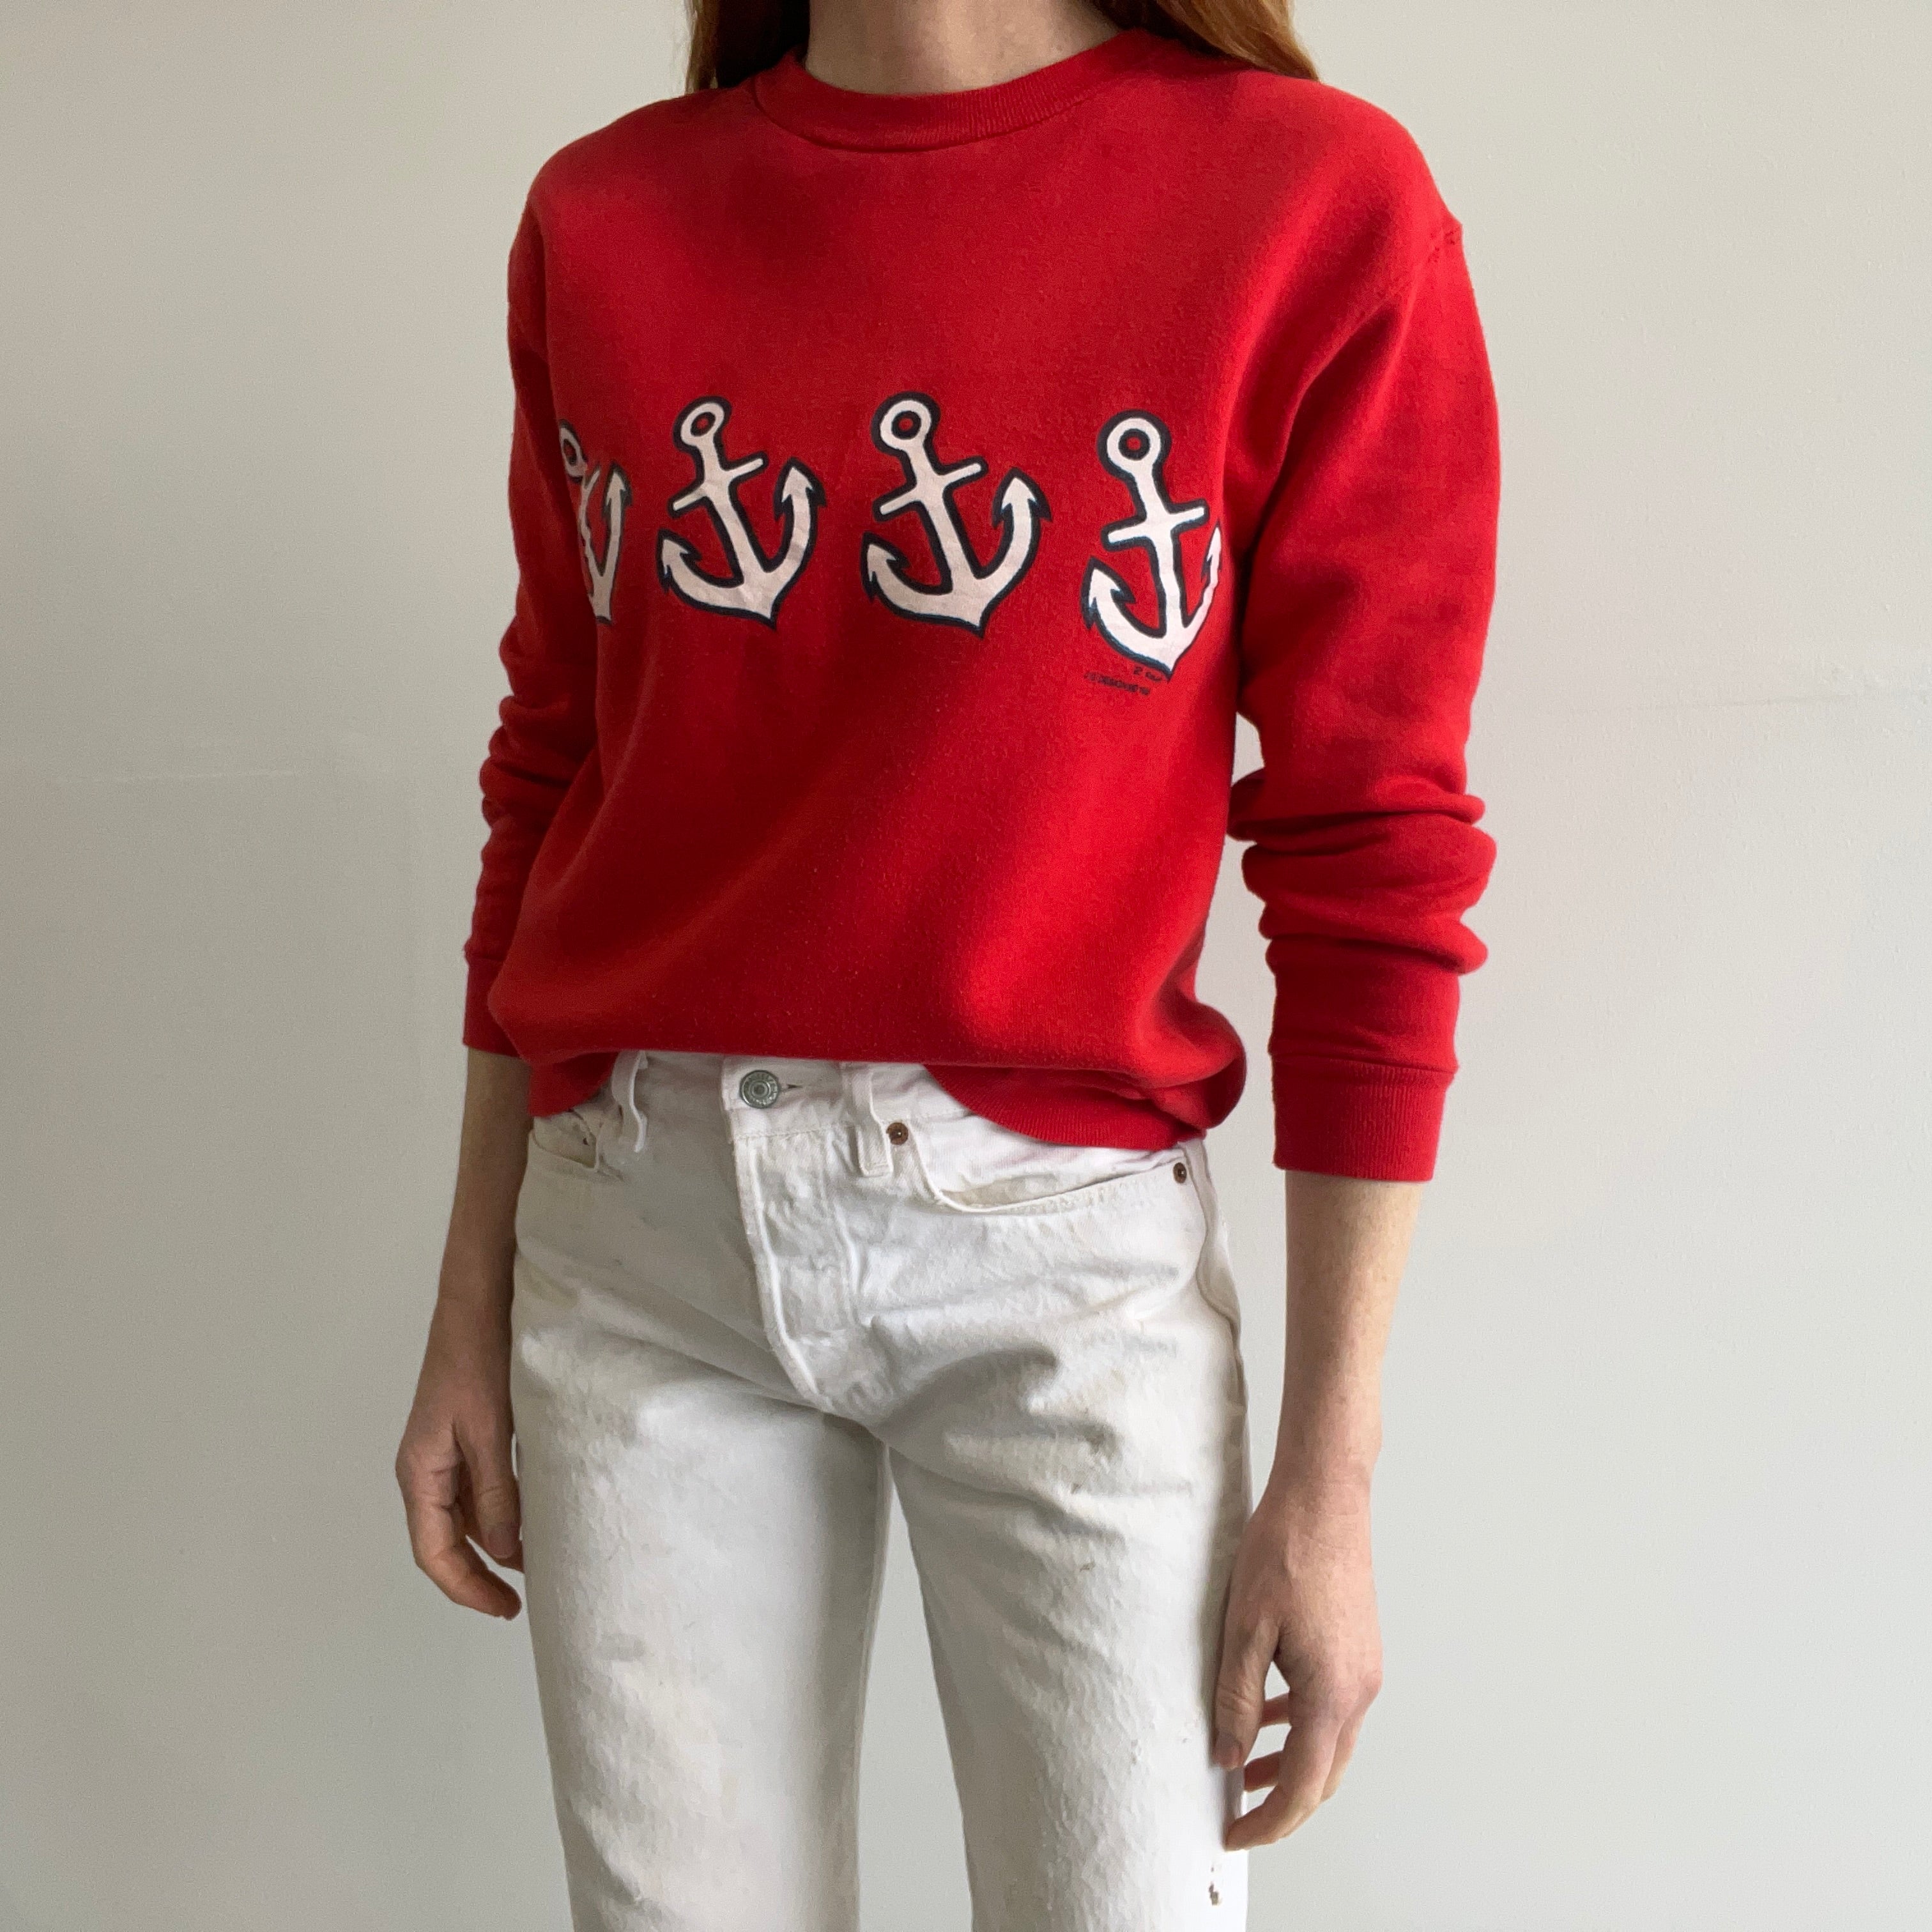 1980s A Whole Lot of Anchors Sweatshirt